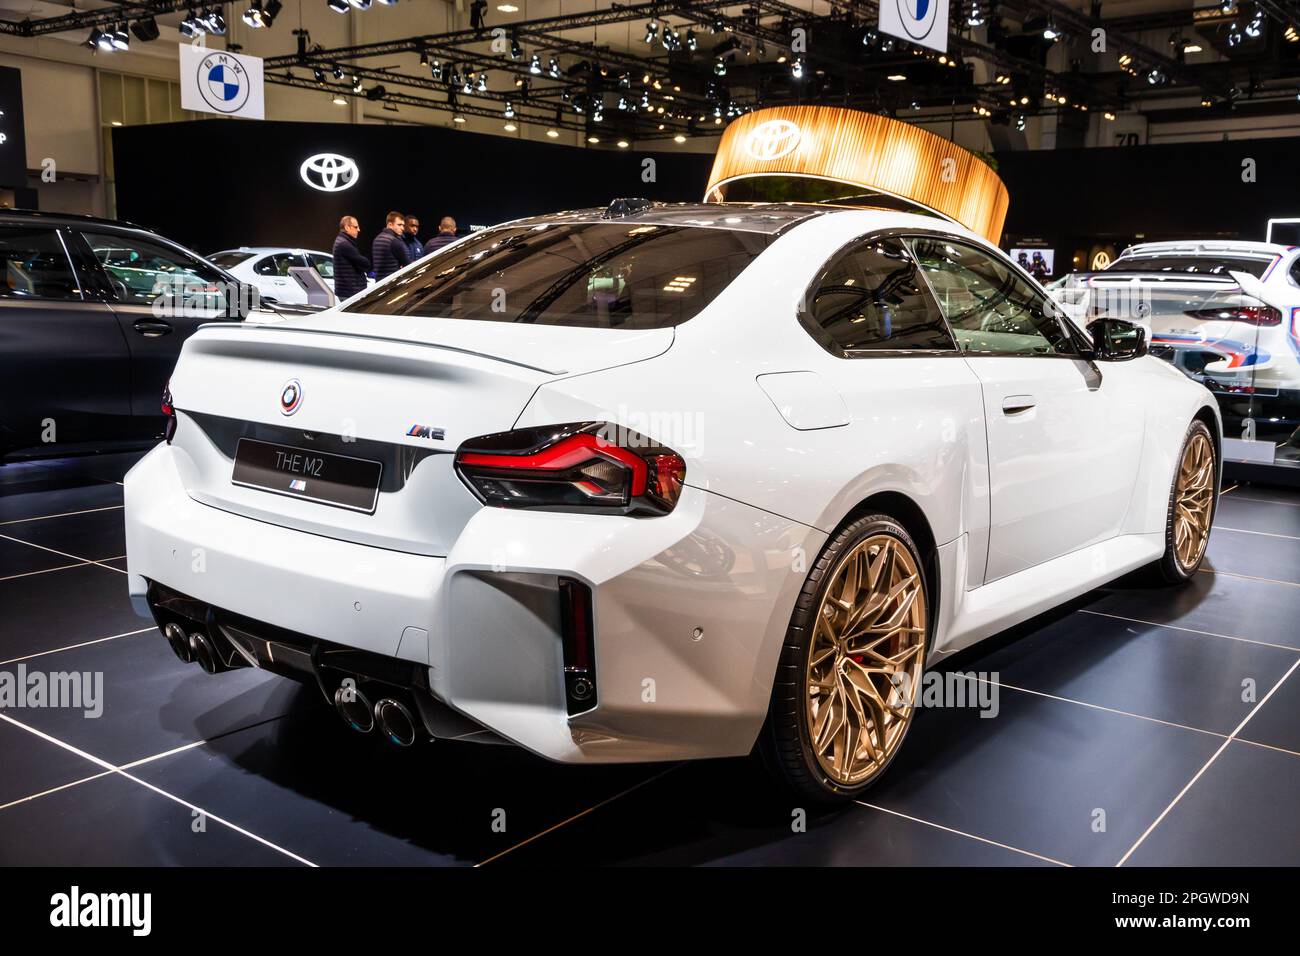 New BMW M2 car showcased at the Brussels Autosalon European Motor Show. Brussels, Belgium - January 13, 2023. Stock Photo